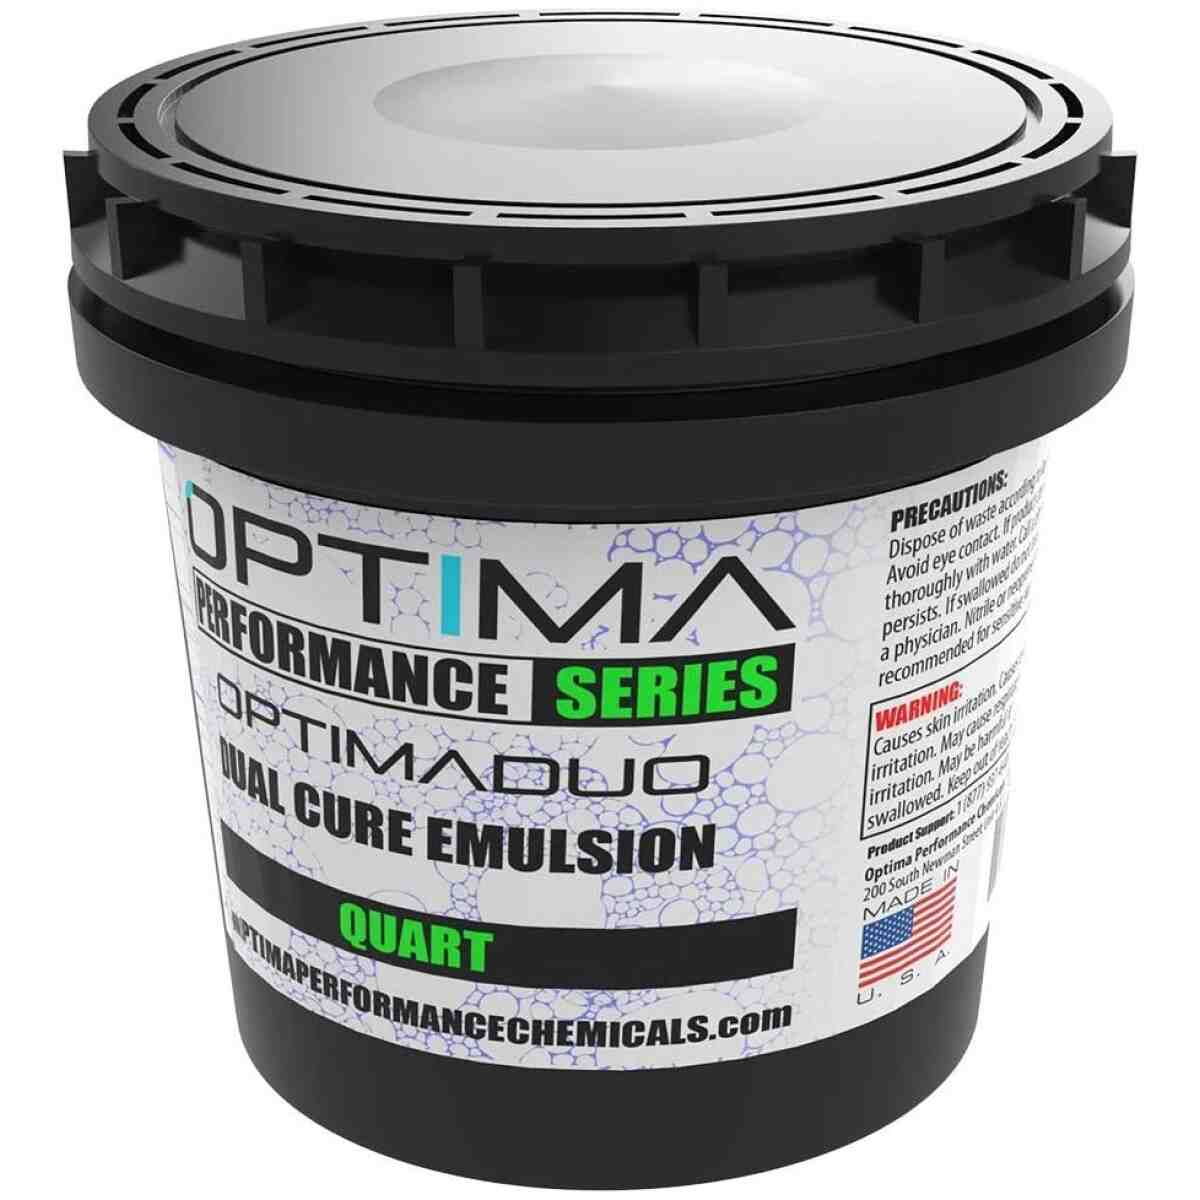 Optima Duo Cure Emulsion (Color Blue) Two Step OPTIMA PERFORMANCE SERIES®